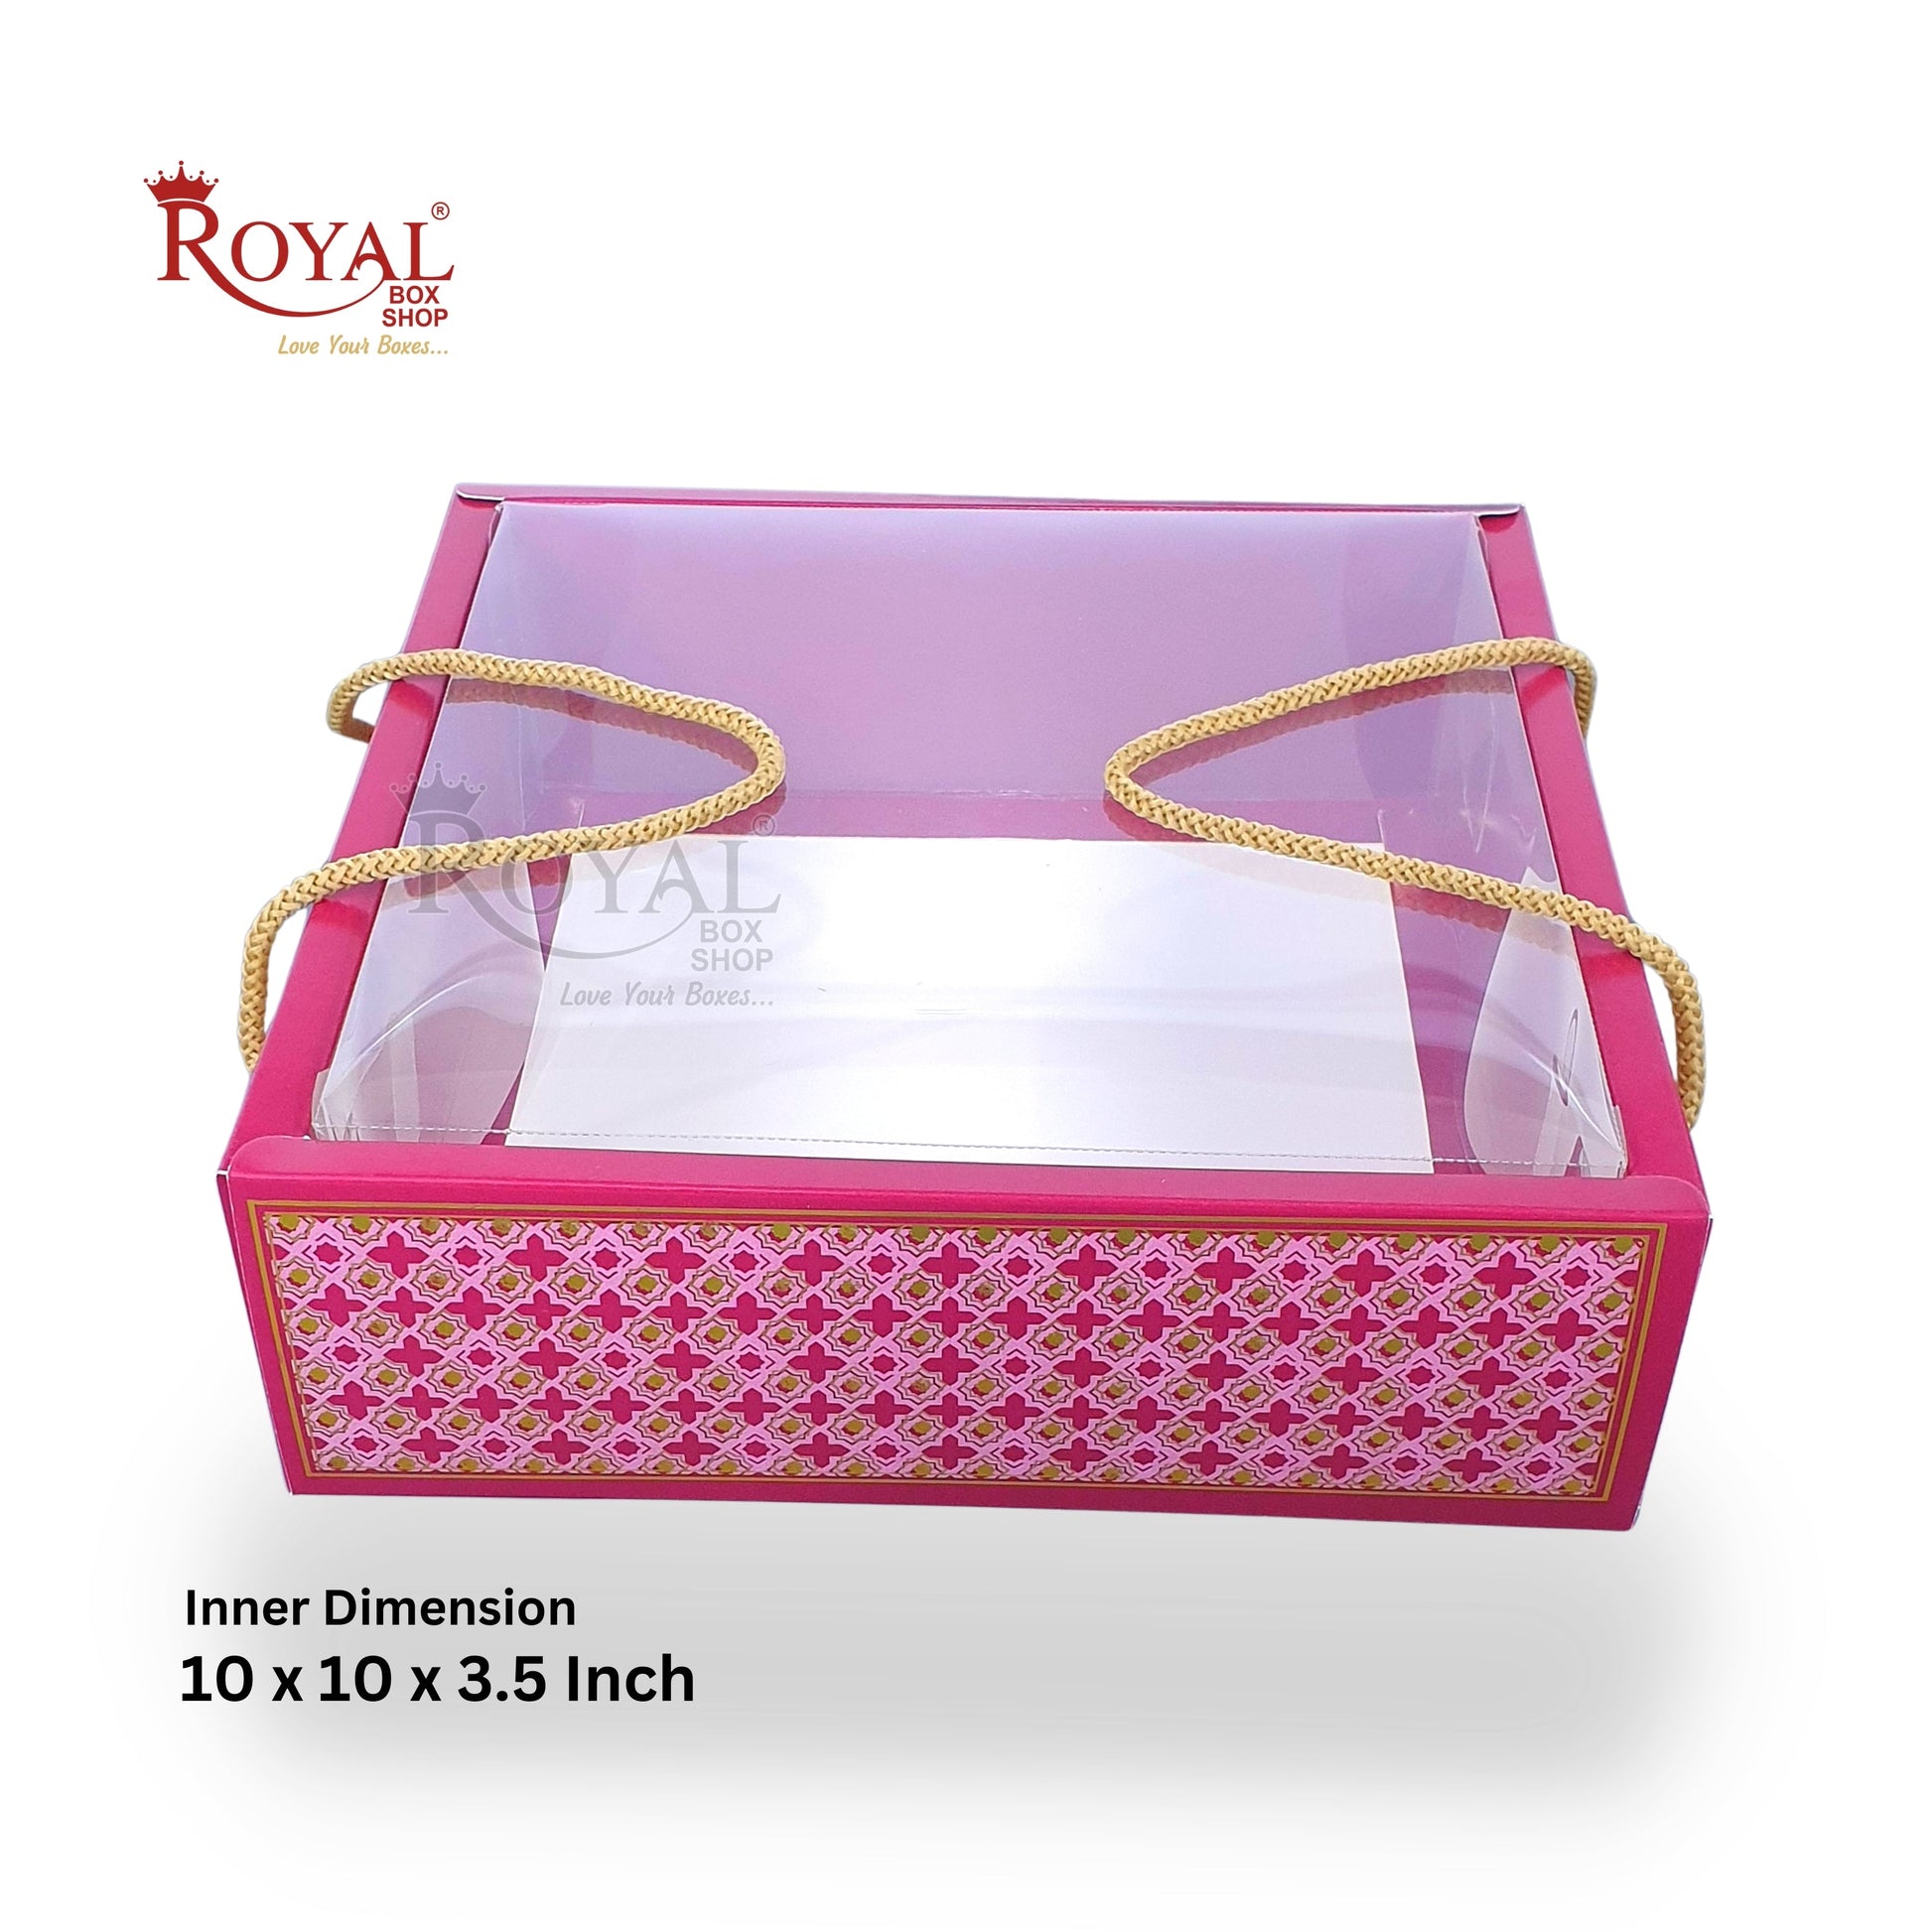 Premium Gift Hamper Bags with Transparent Lid I 10 x 10 x 3.5 inches I Red Star Golden Foil Print I Wedding Party Gifts, Return favor Gifting Royal Box Shop